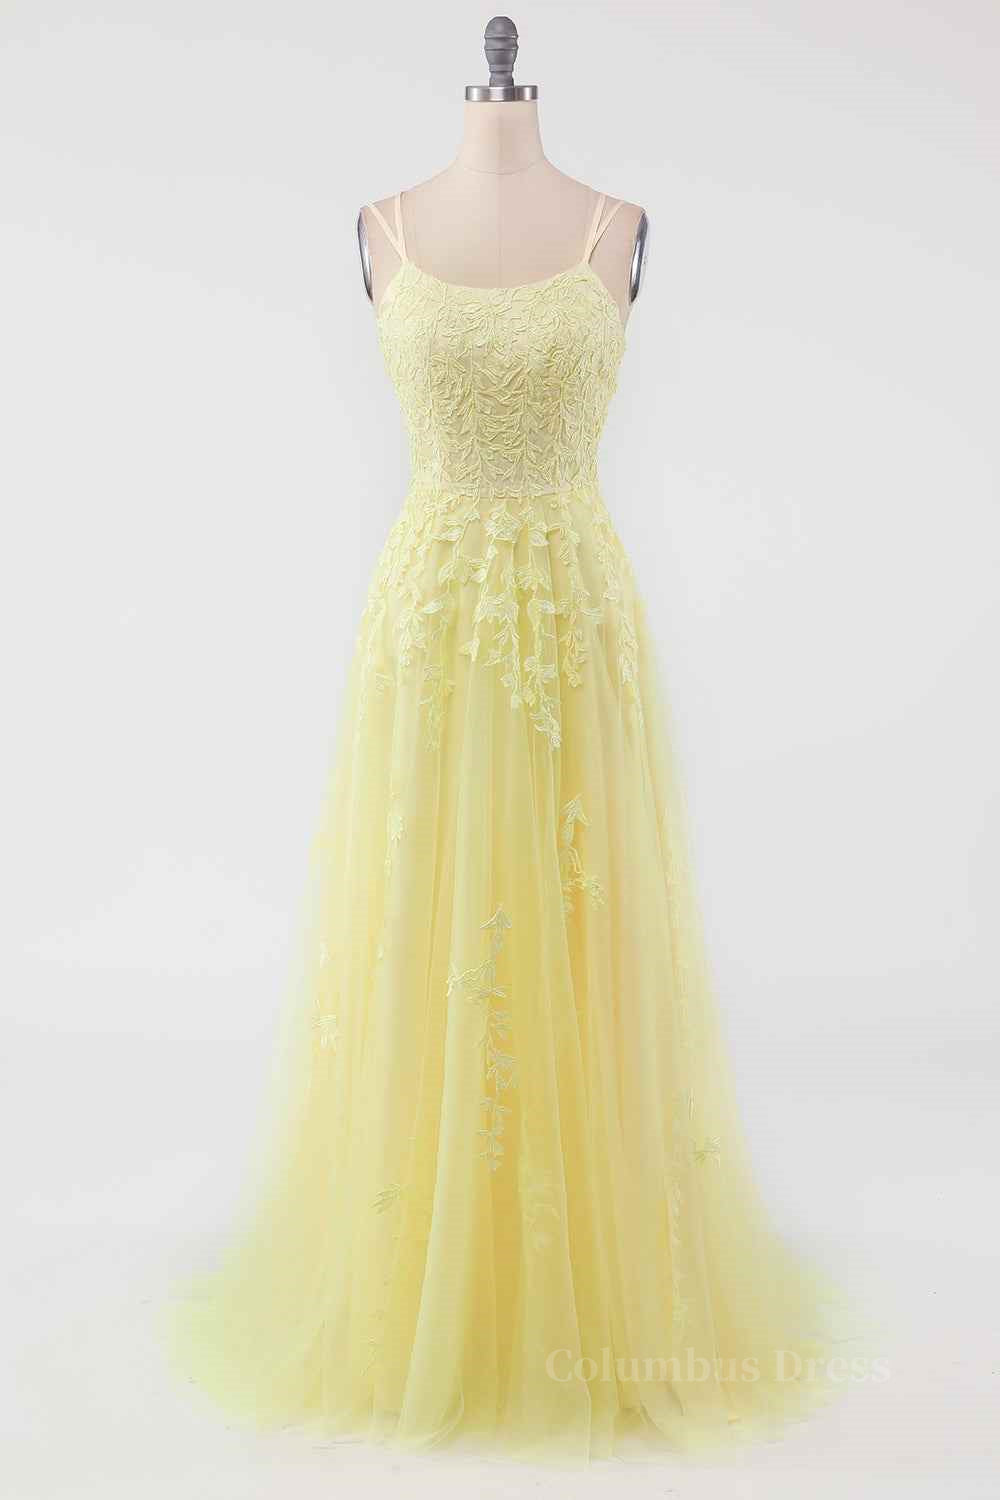 Party Dress In Store, Light Yellow A-line Scoop Neckline Embroidered Tulle Long Prom Dress